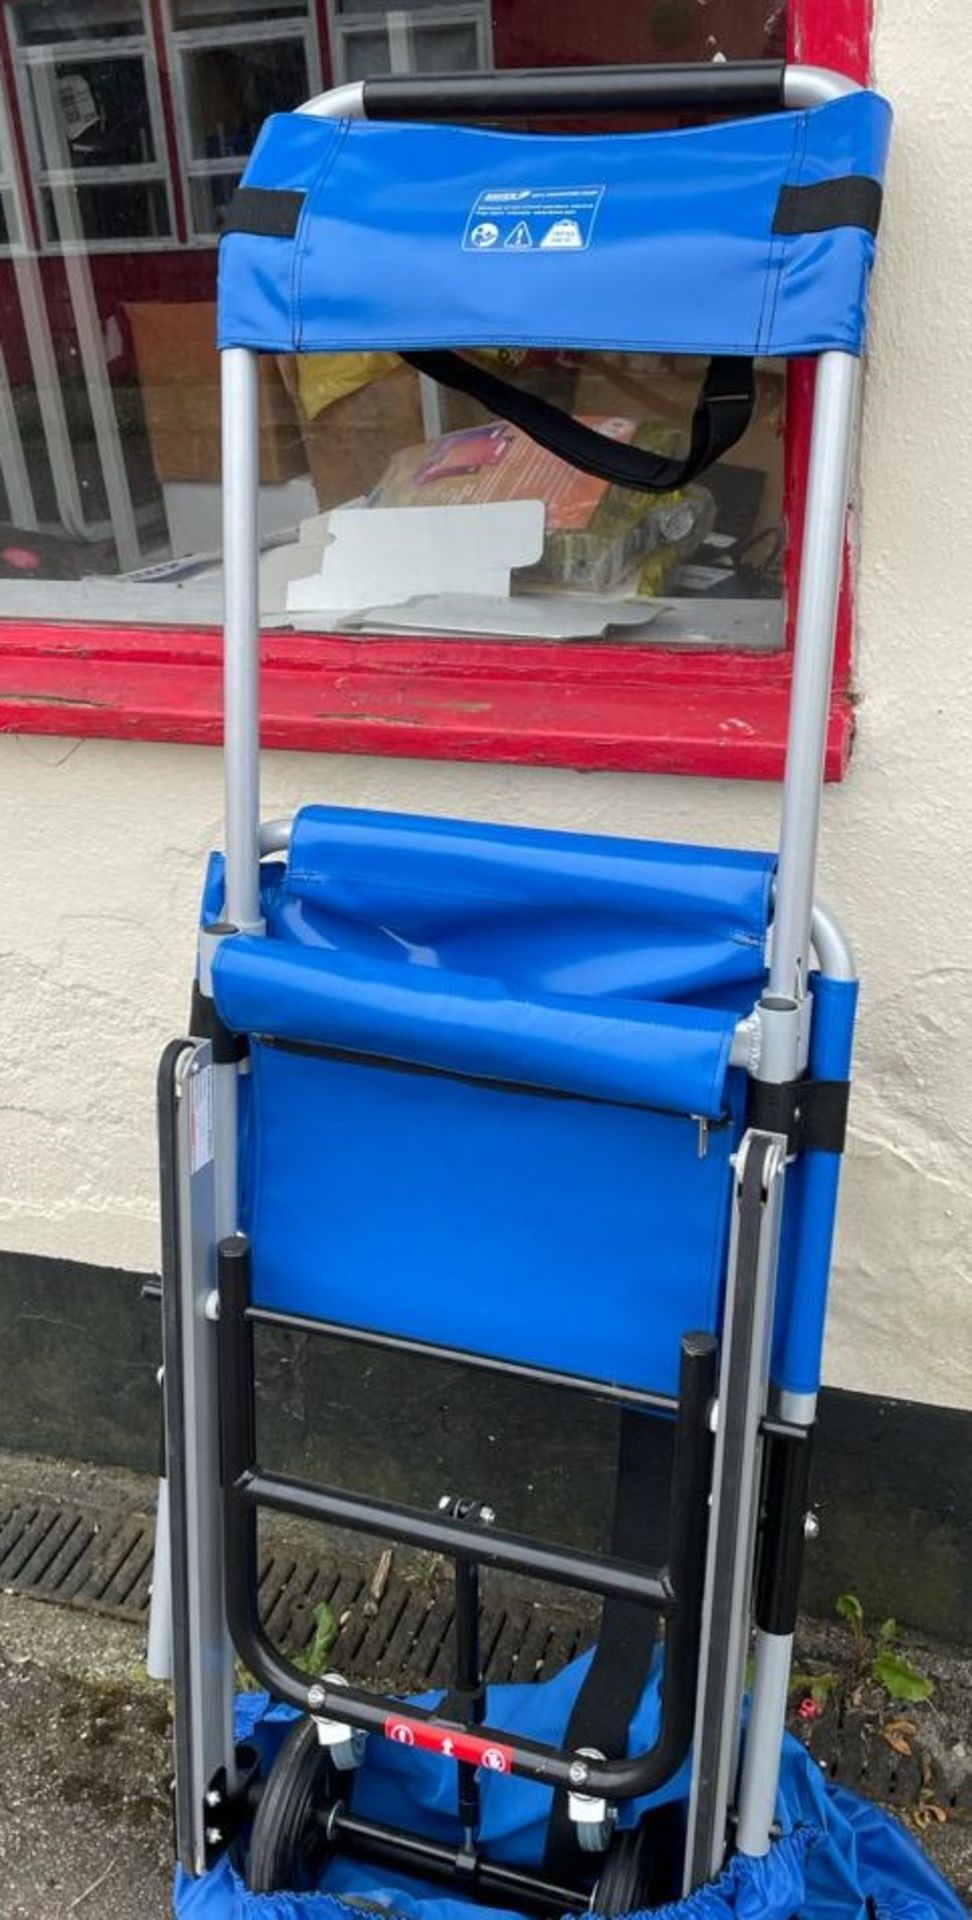 1 x Evacuation Chair With Cover - CL667 - Location: Brighton, Sussex, BN26Collections:This item is